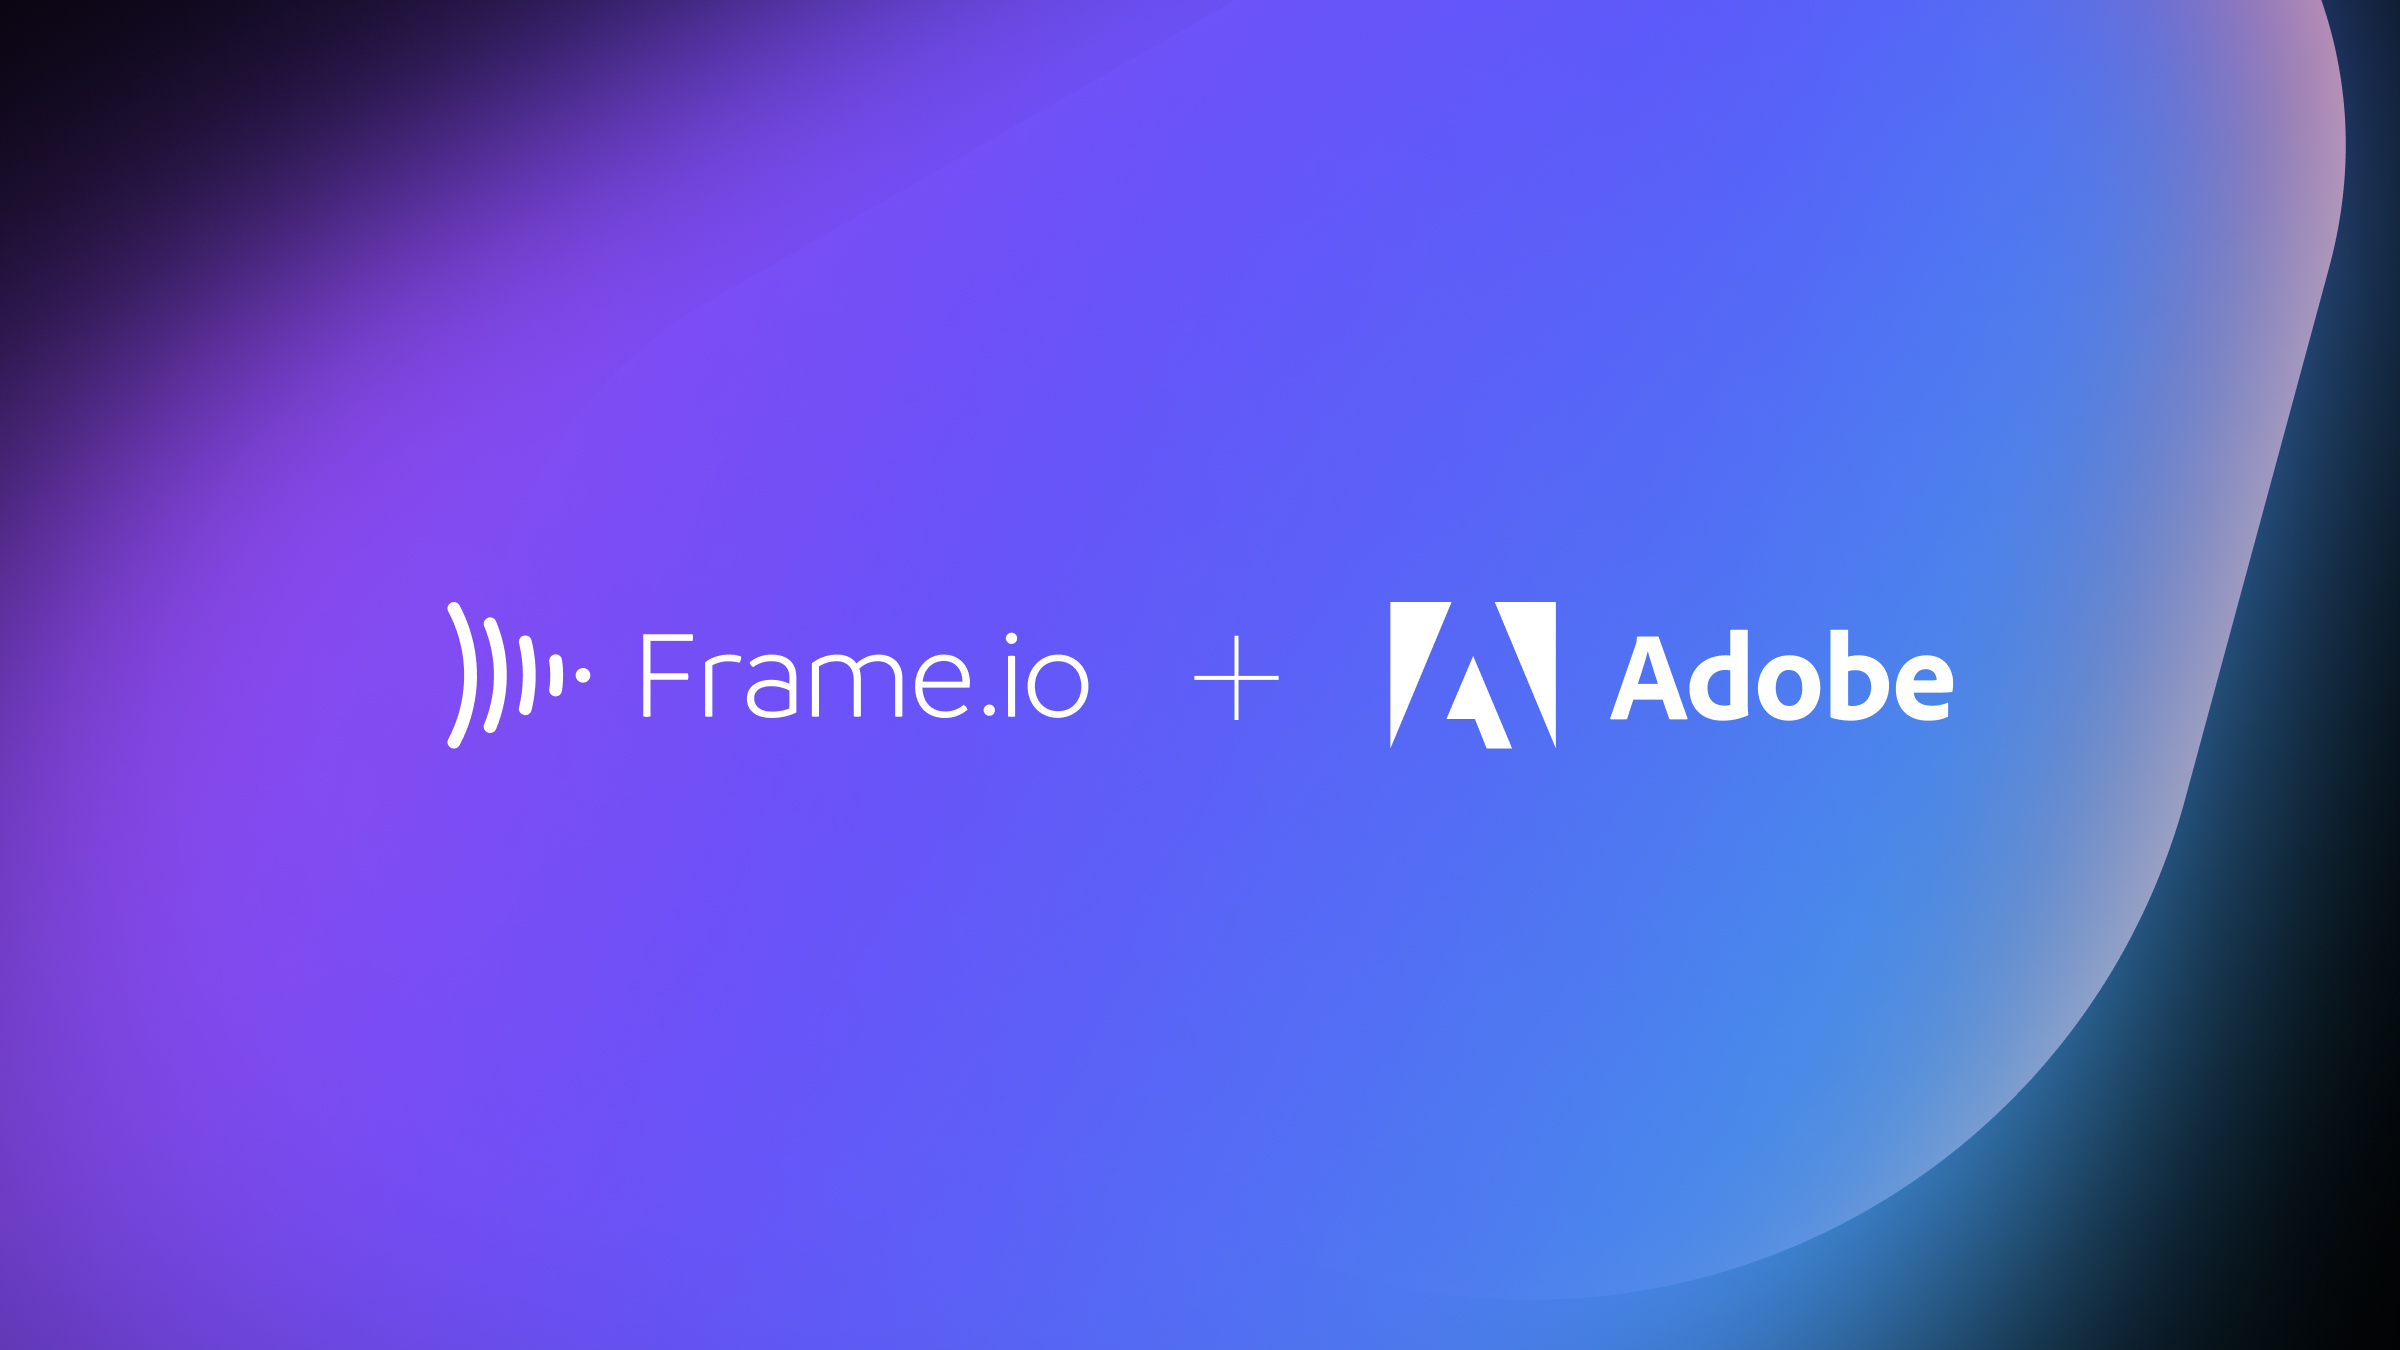 Frame.io and Adobe announce their intention to join forces.